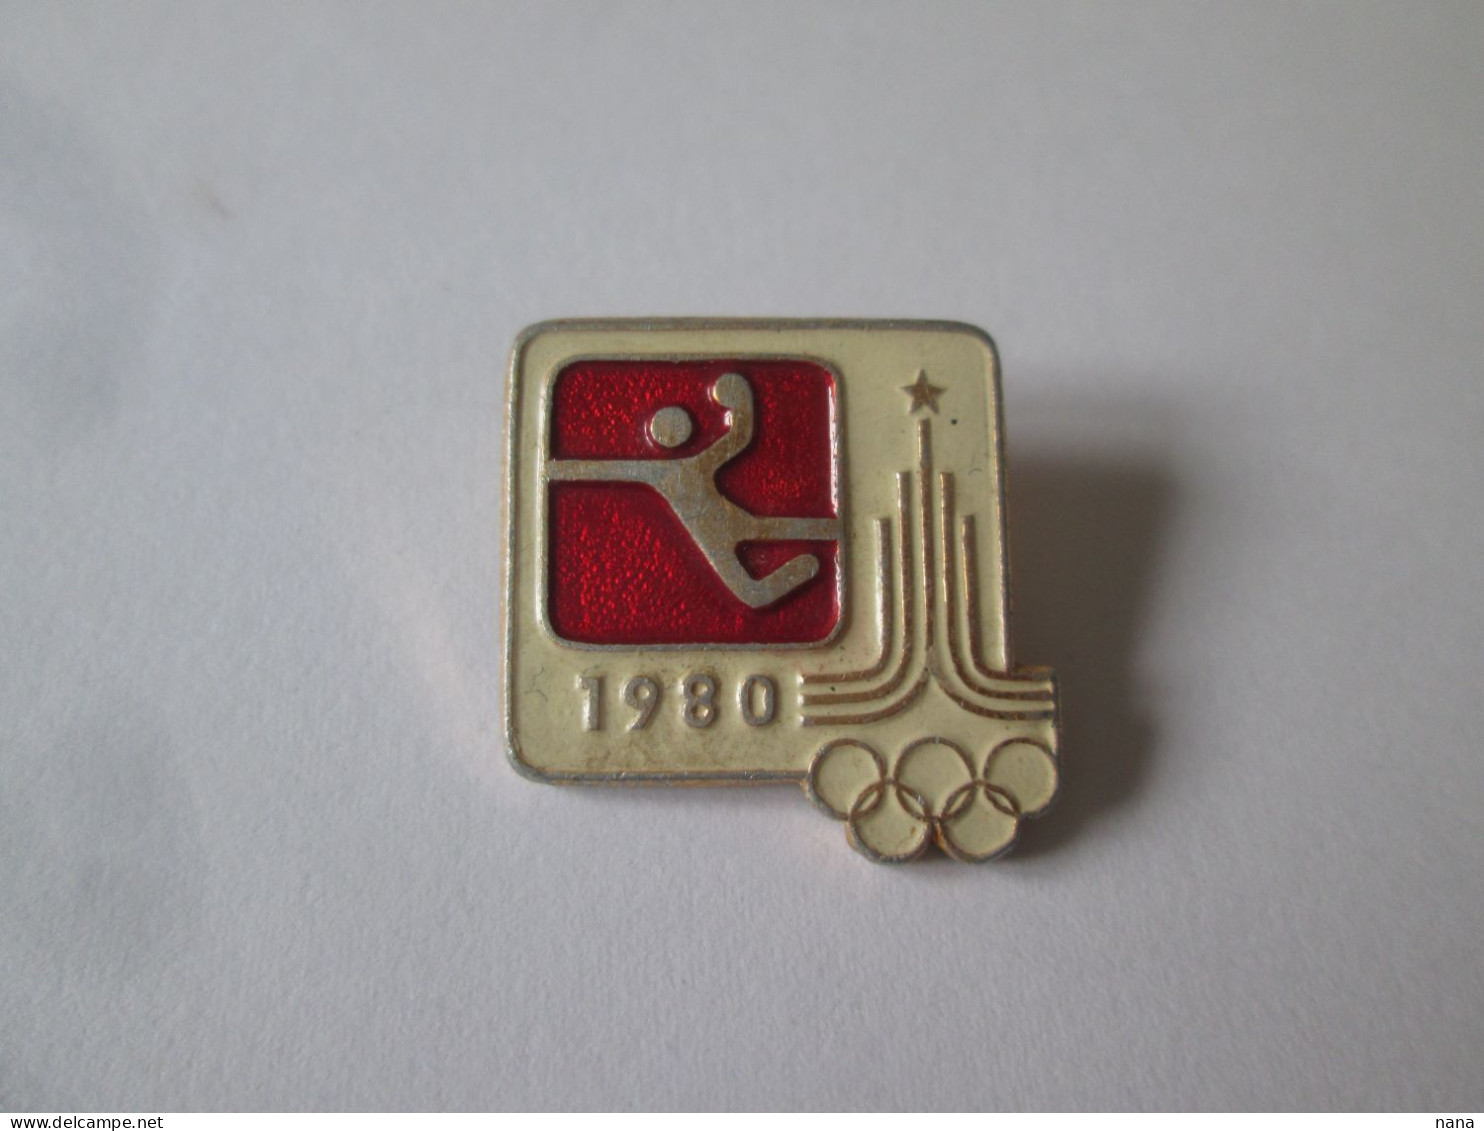 Insigne Russe Jeux Olympiques De Moscou 1980/Russian Badge Moscow Olympic Games 1980,size=22 X 22 Mm - Juegos Olímpicos